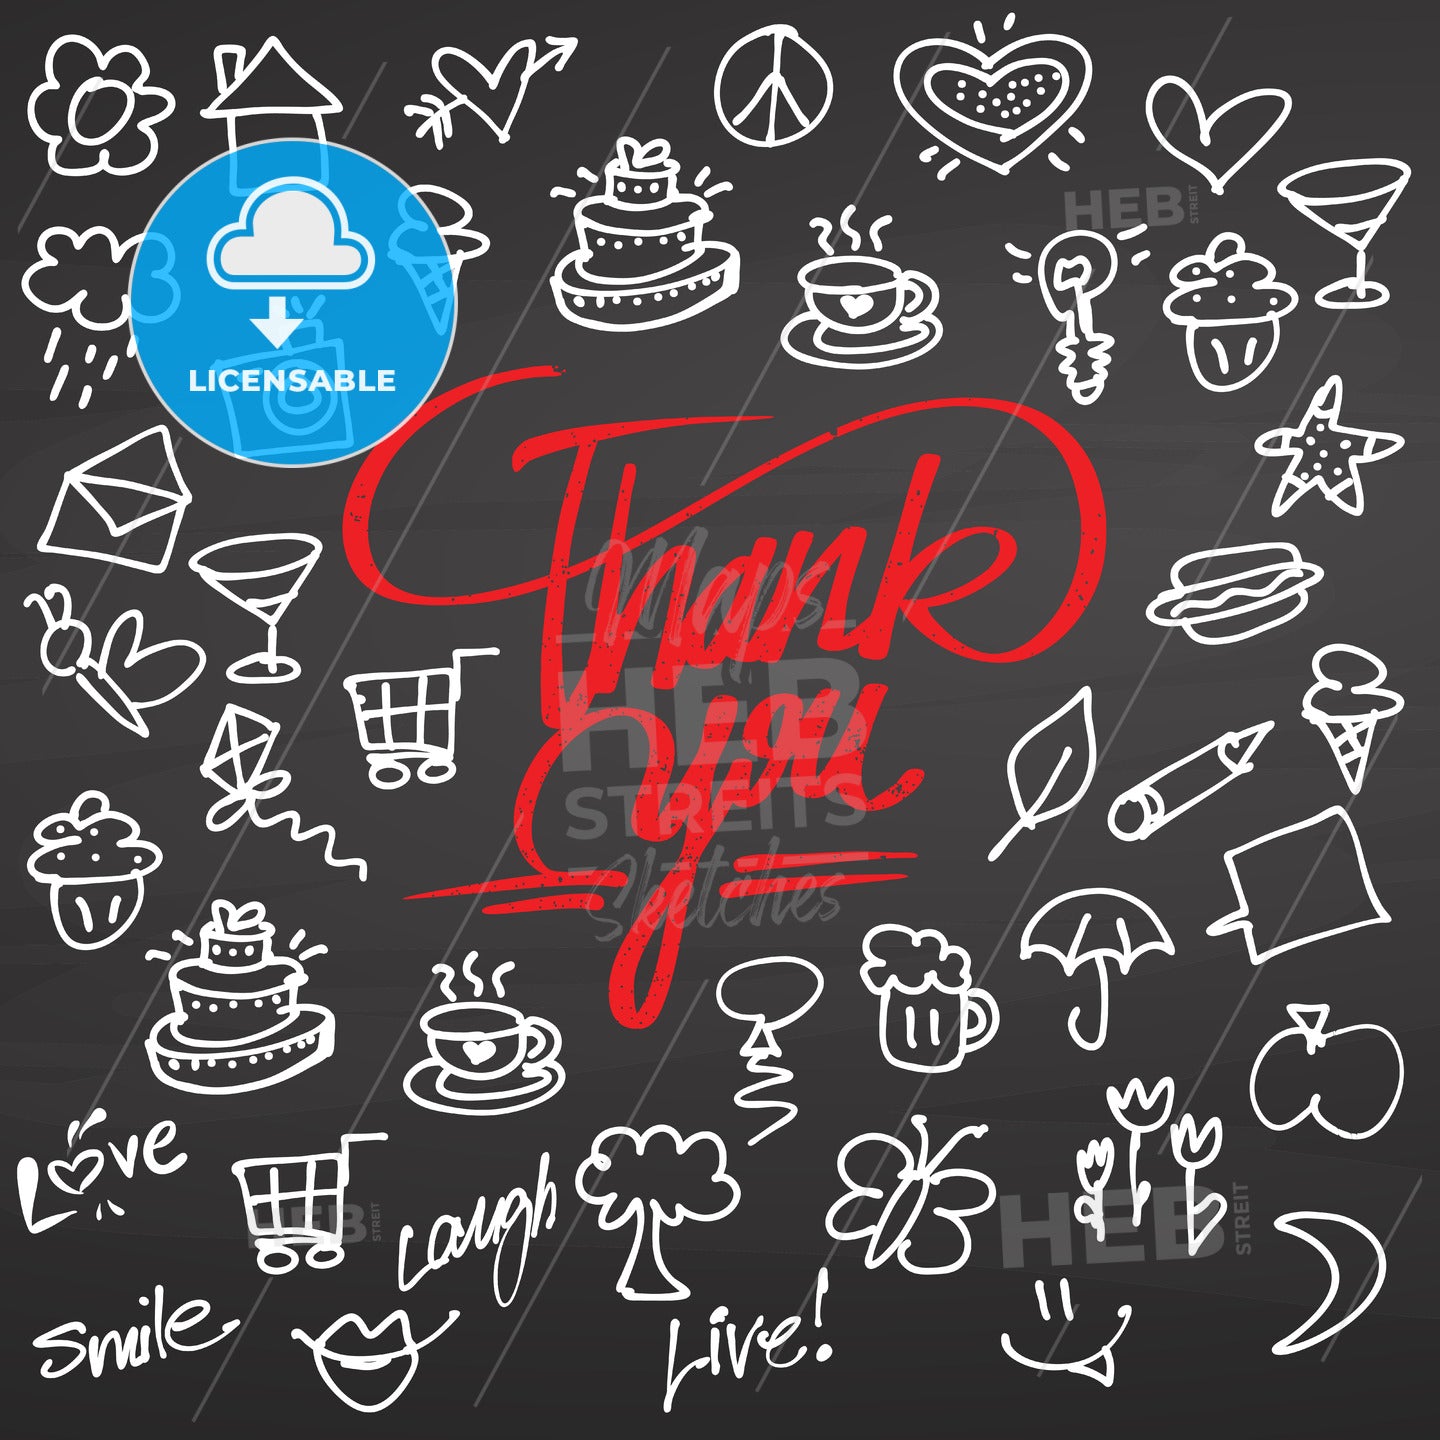 Thank you and doodles on chalkboard – instant download